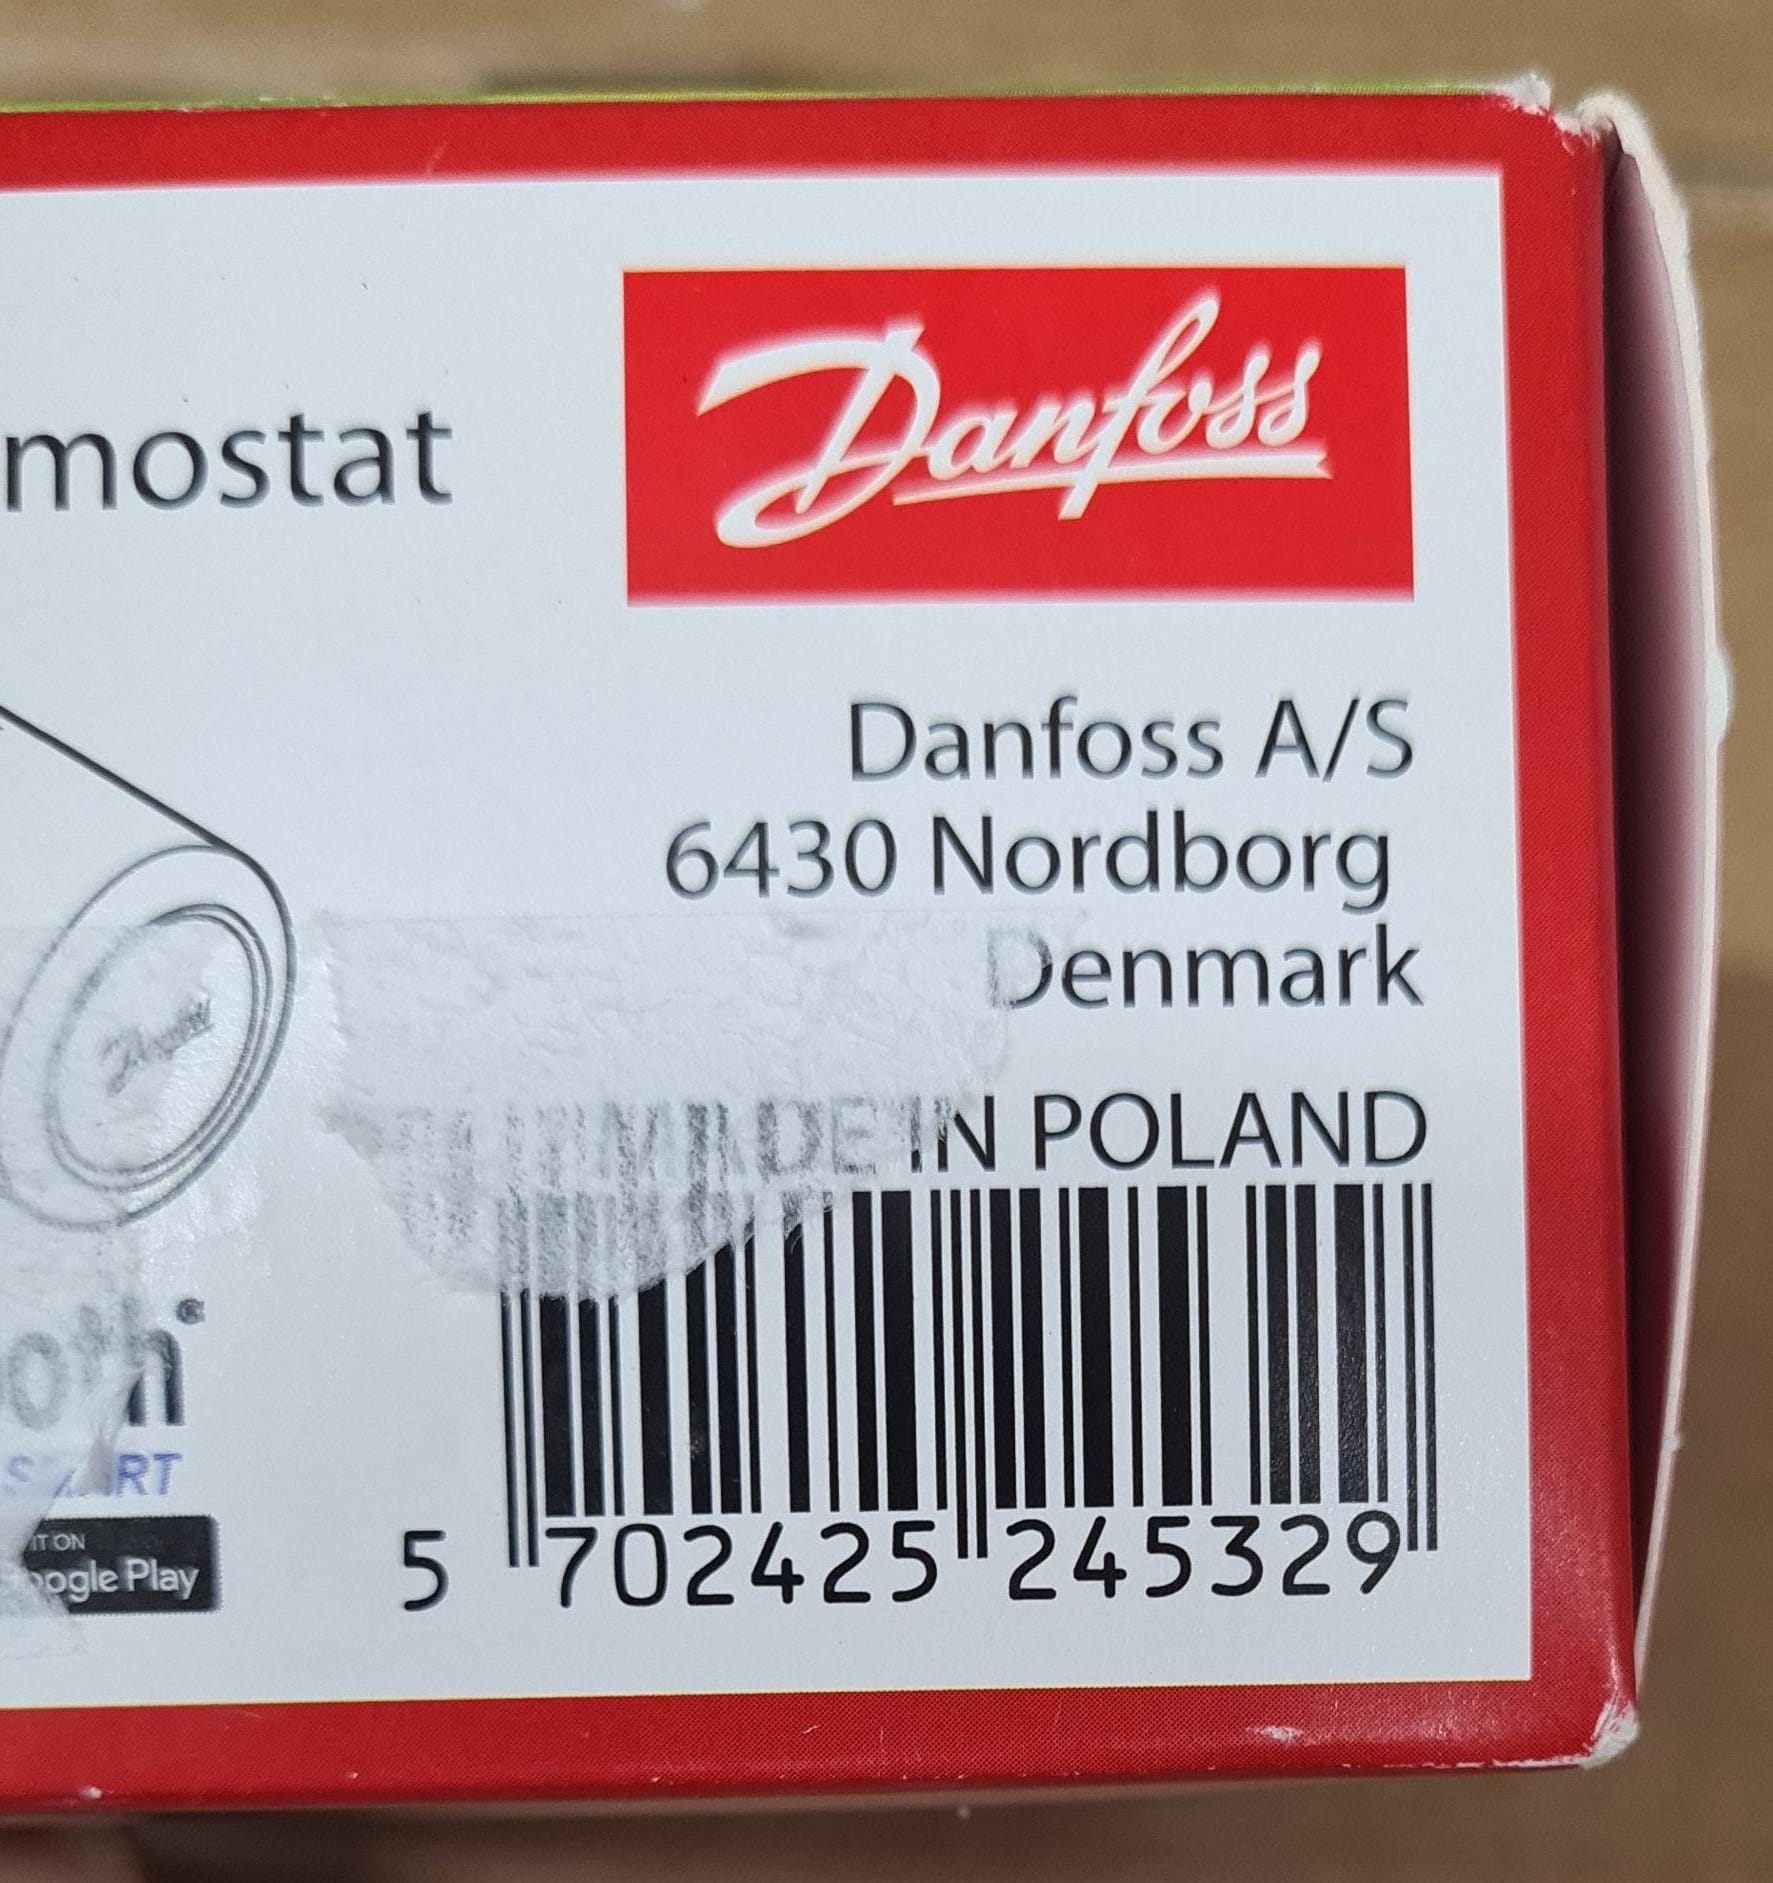 Danfoss 014G1115 Eco Programmable Radiator Thermostat with Bluetooth Function UK Smart Thermostat-5329